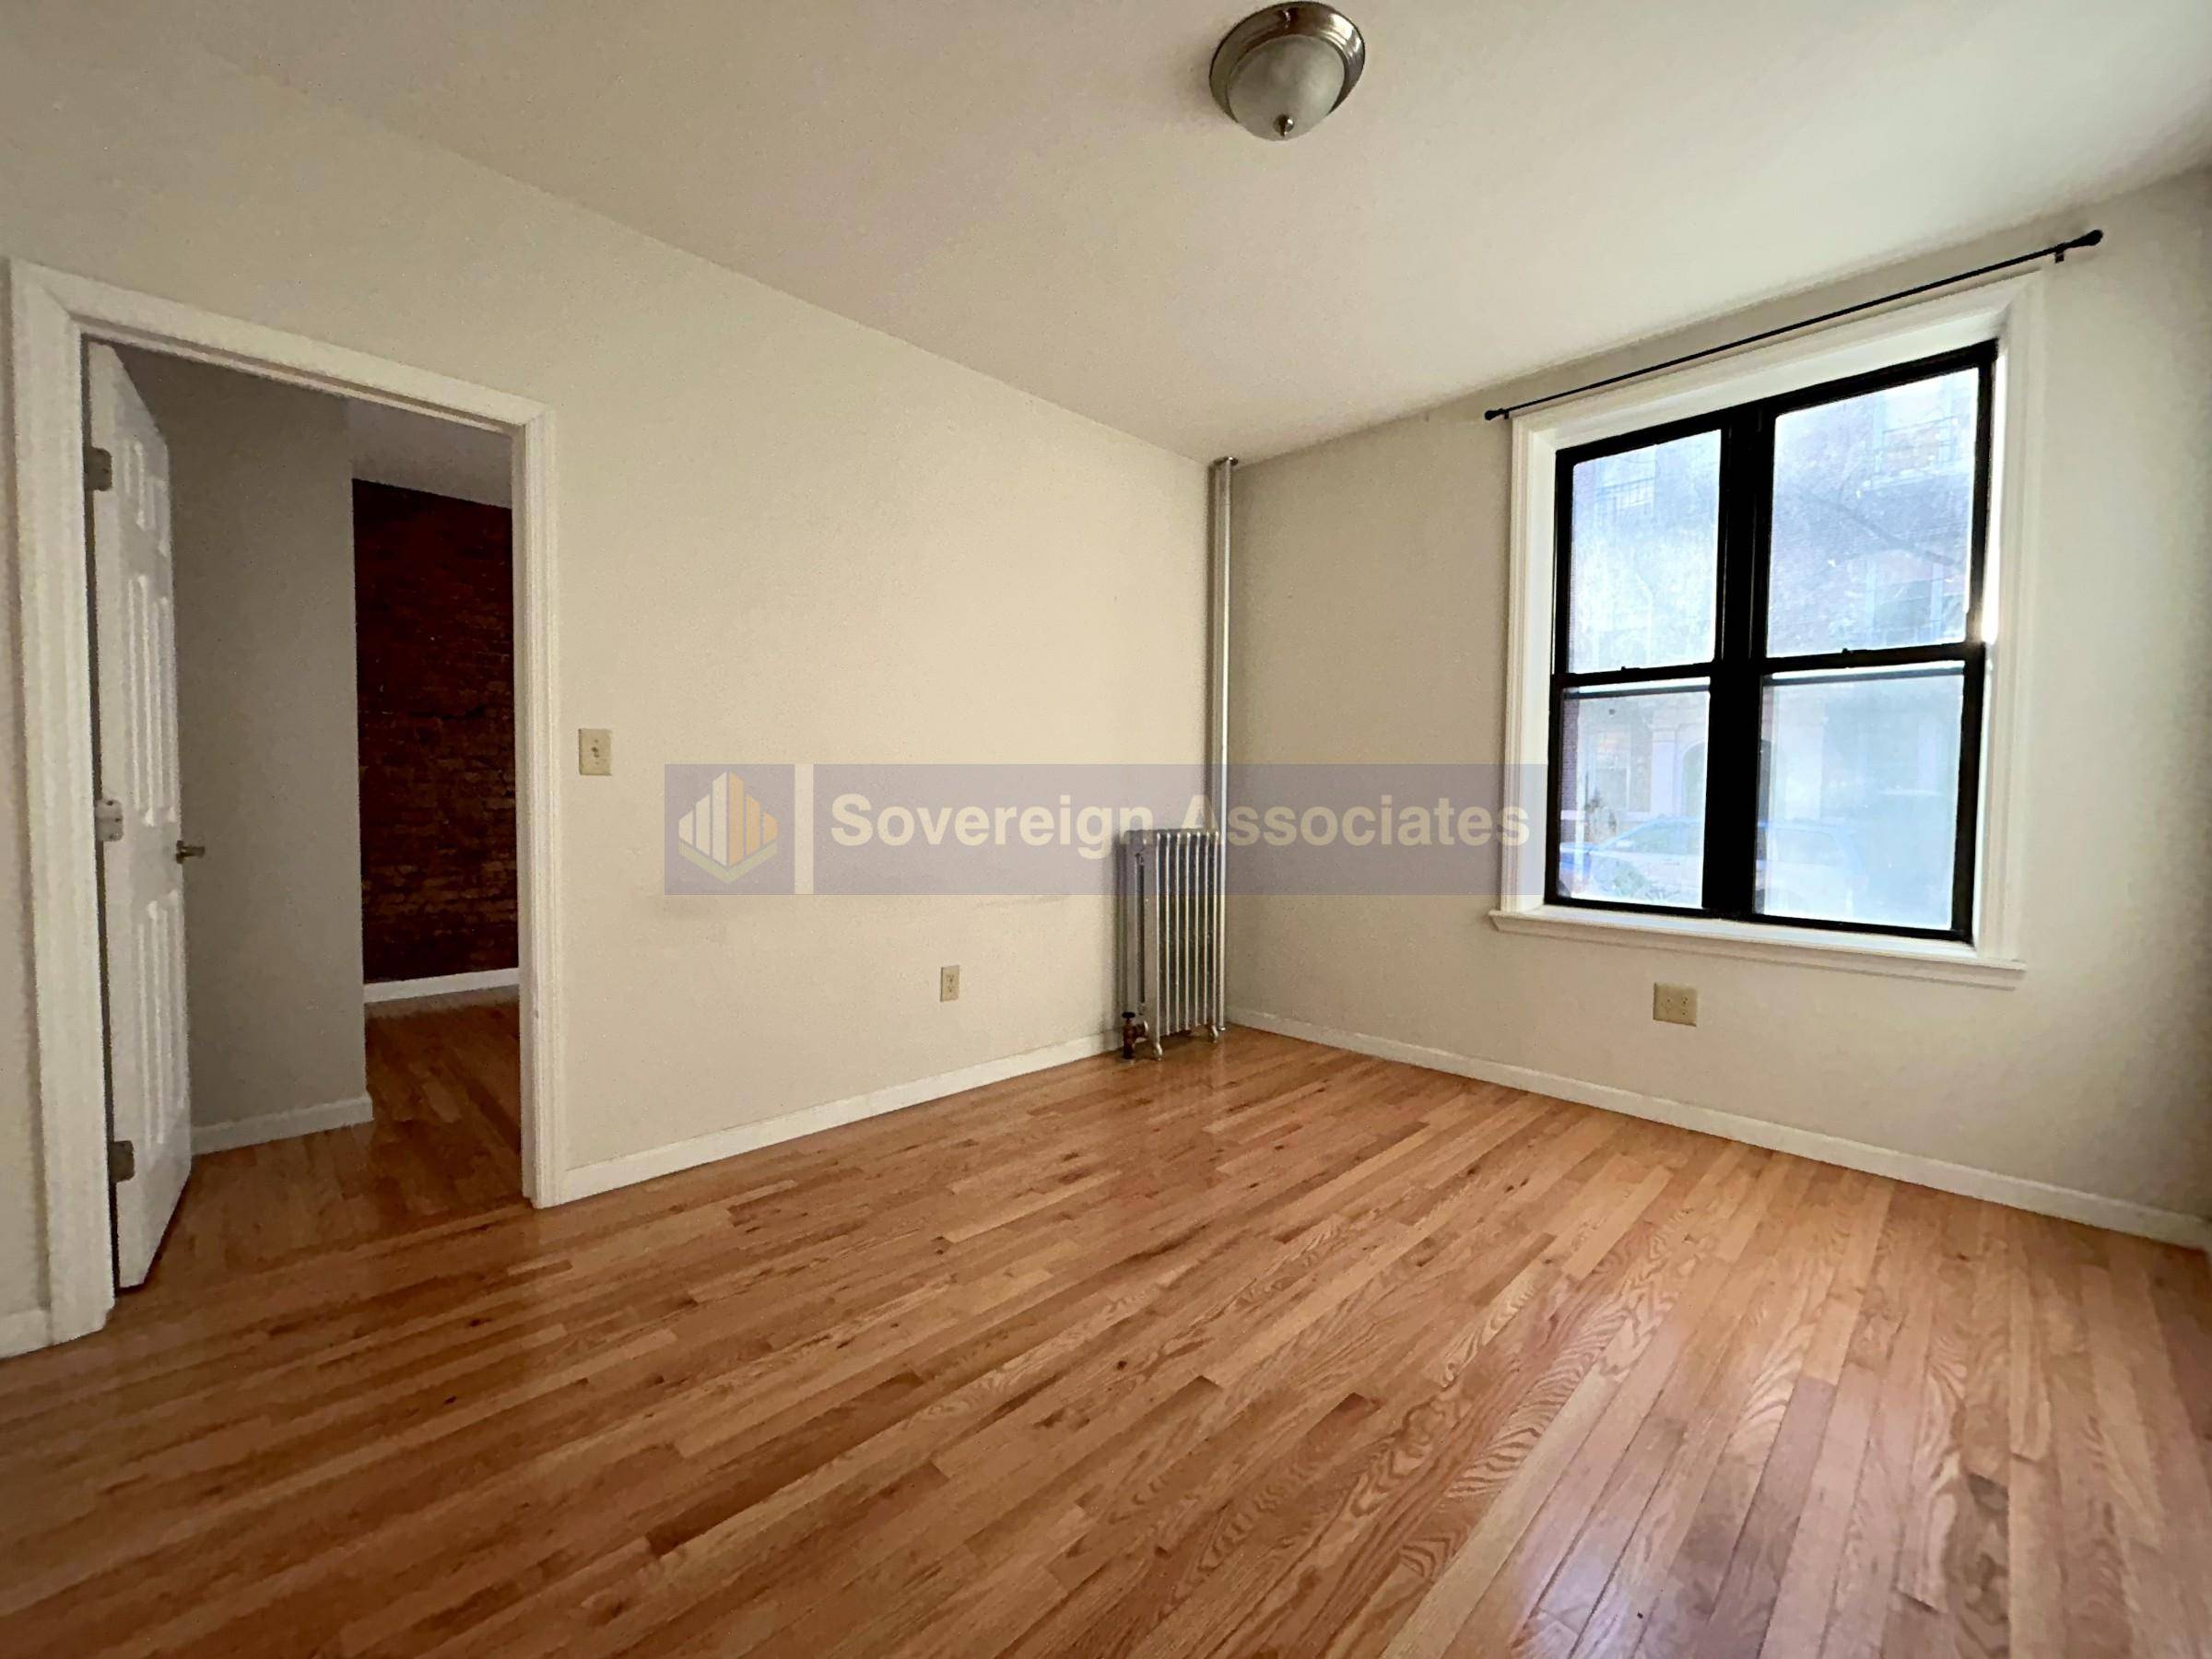 Renovated three bedroom apartment located in a walk up building on Cabrini Blvd.